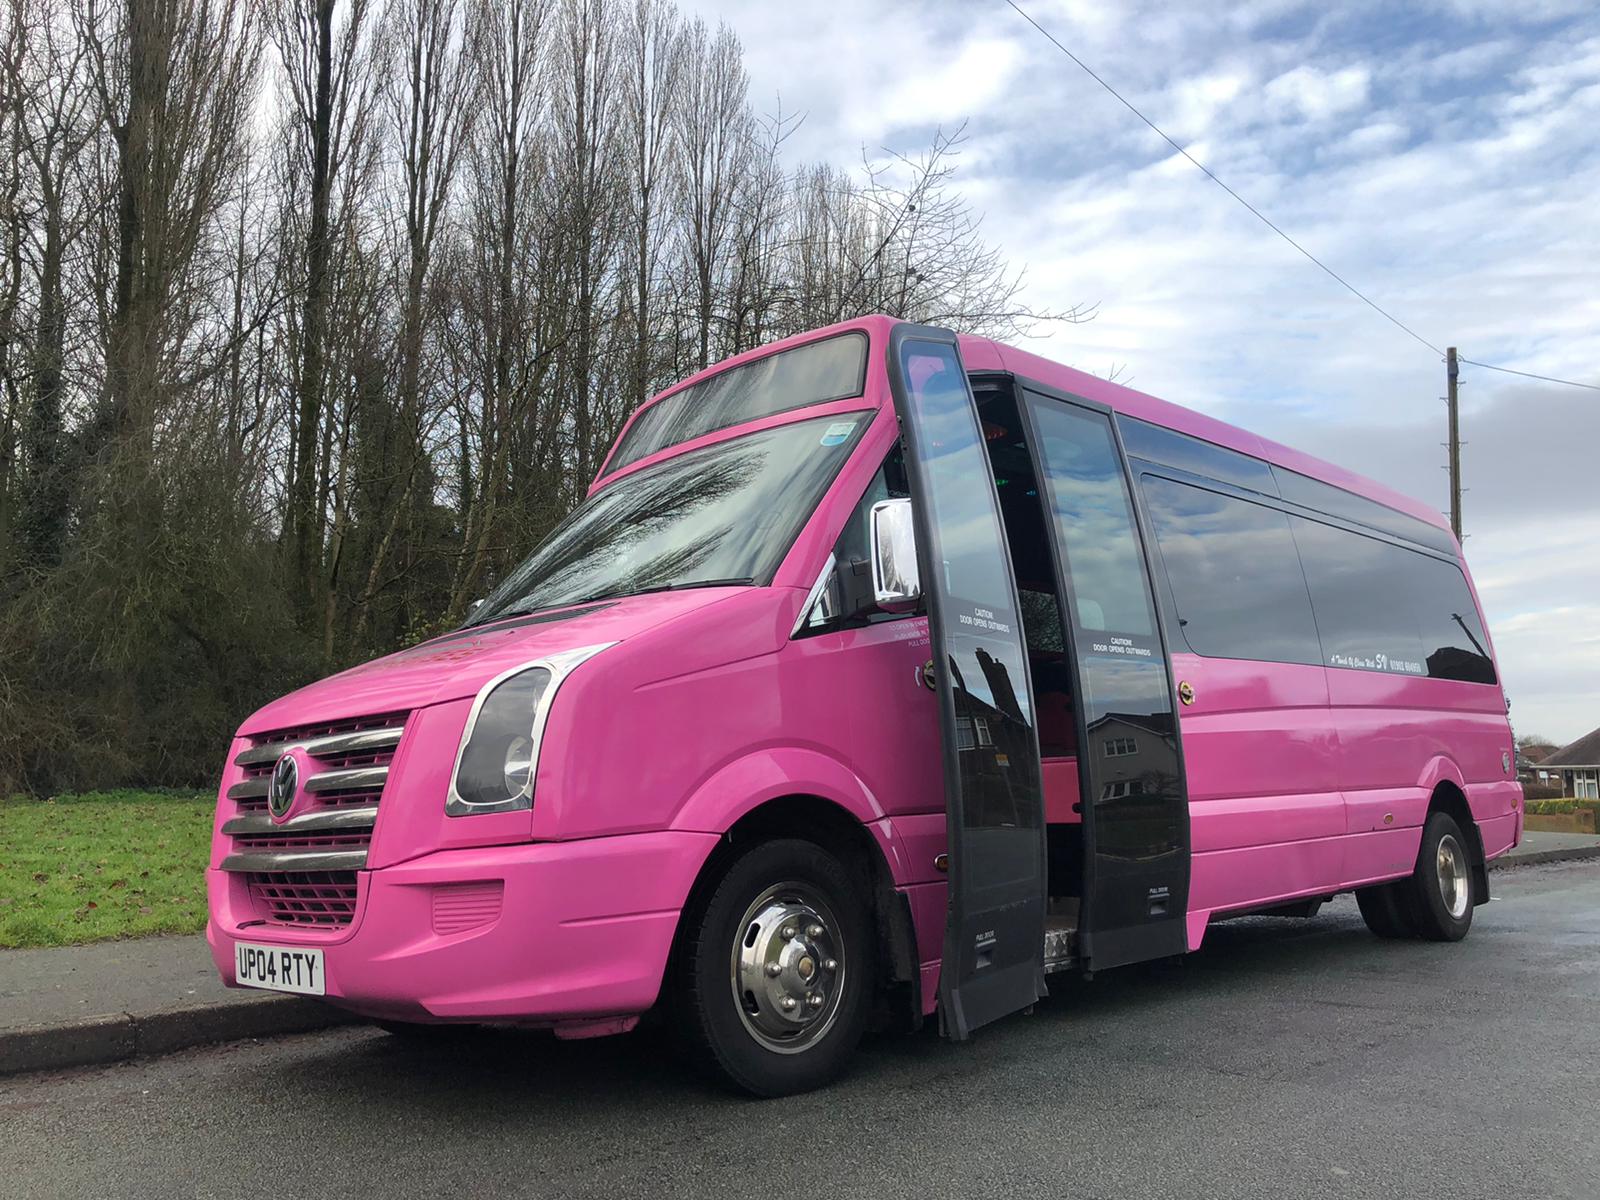 Maximising Fun: What to Look for in UK Party Bus Amenities